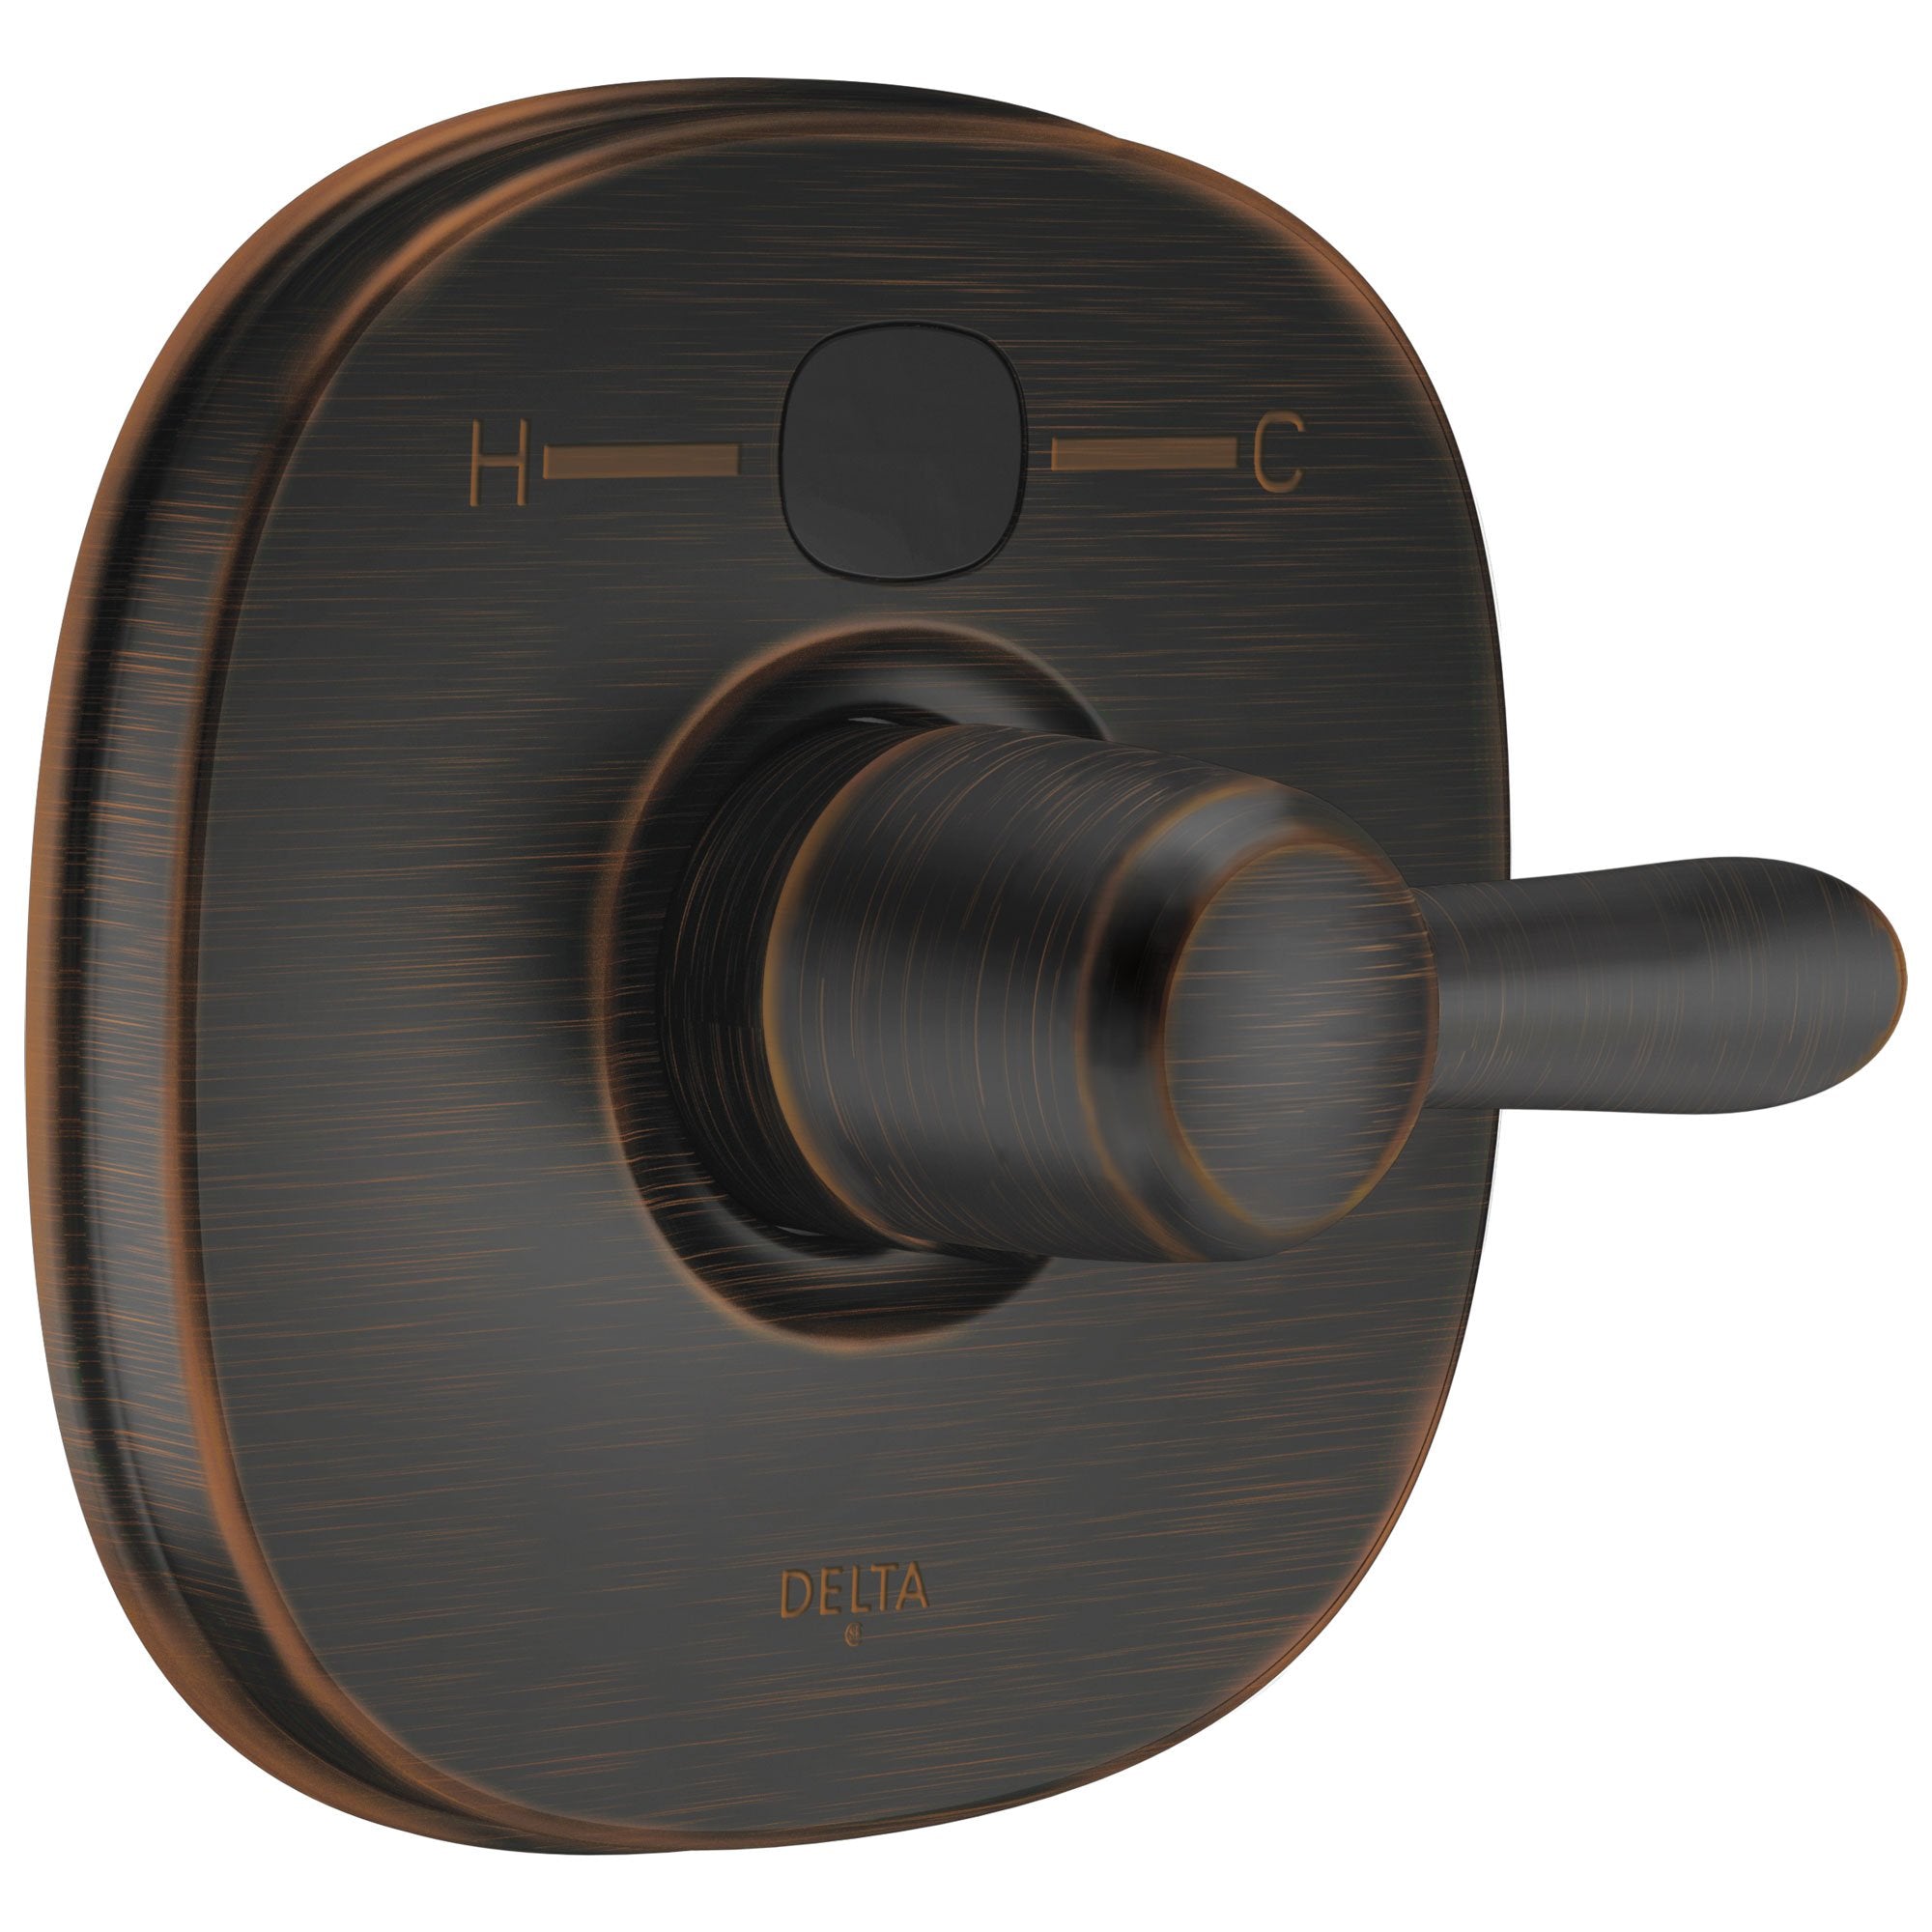 Delta Venetian Bronze Lahara Transitional 14 Series Digital Display Temp2O Shower Valve Control INCLUDES Single Handle and Rough-in Valve with Stops D1624V